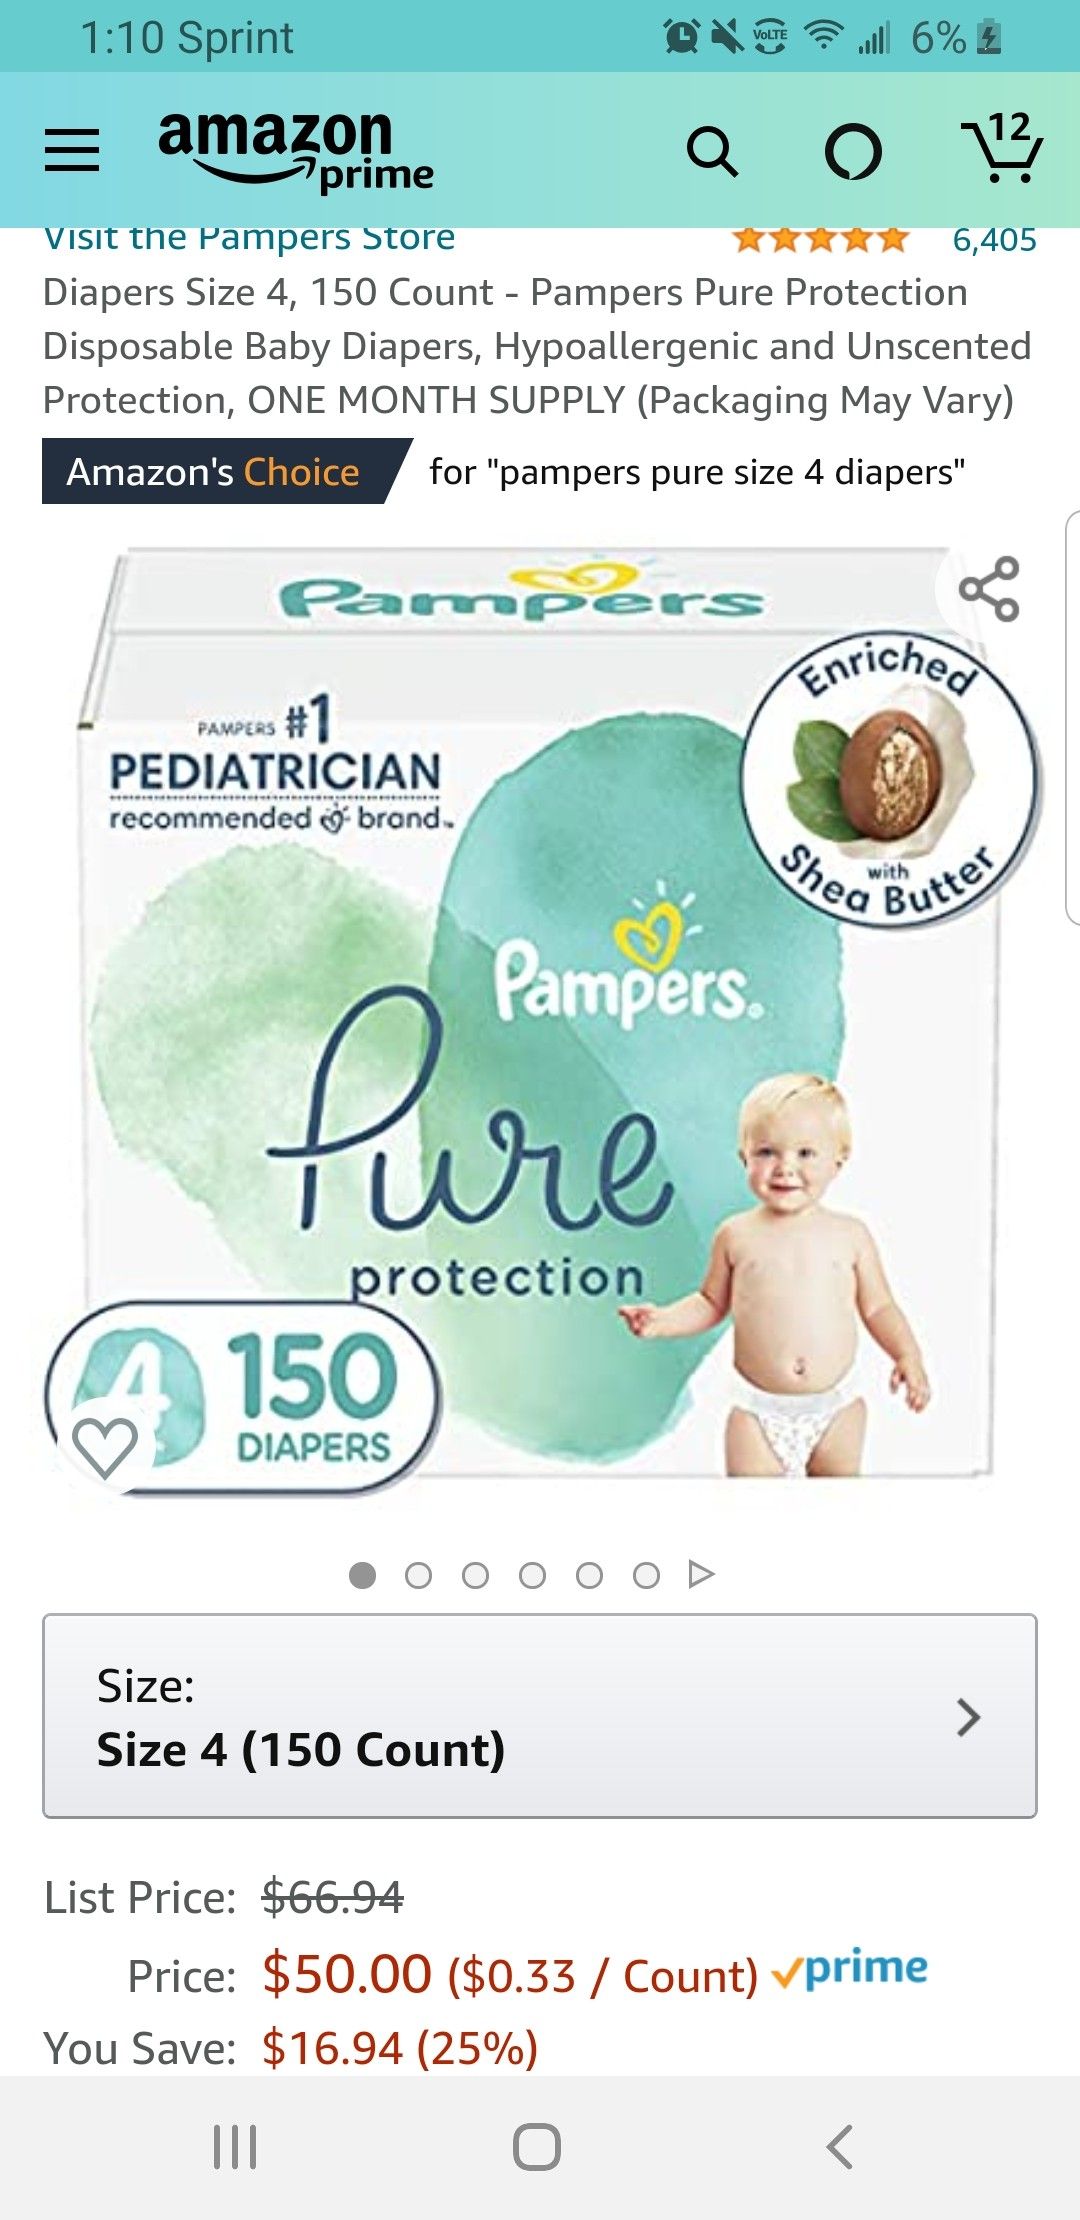 Diapers Size 4, 150 Count - Pampers Pure Protection Disposable Baby Diapers, Hypoallergenic and Unscented Protection, ONE MONTH SUPPLY